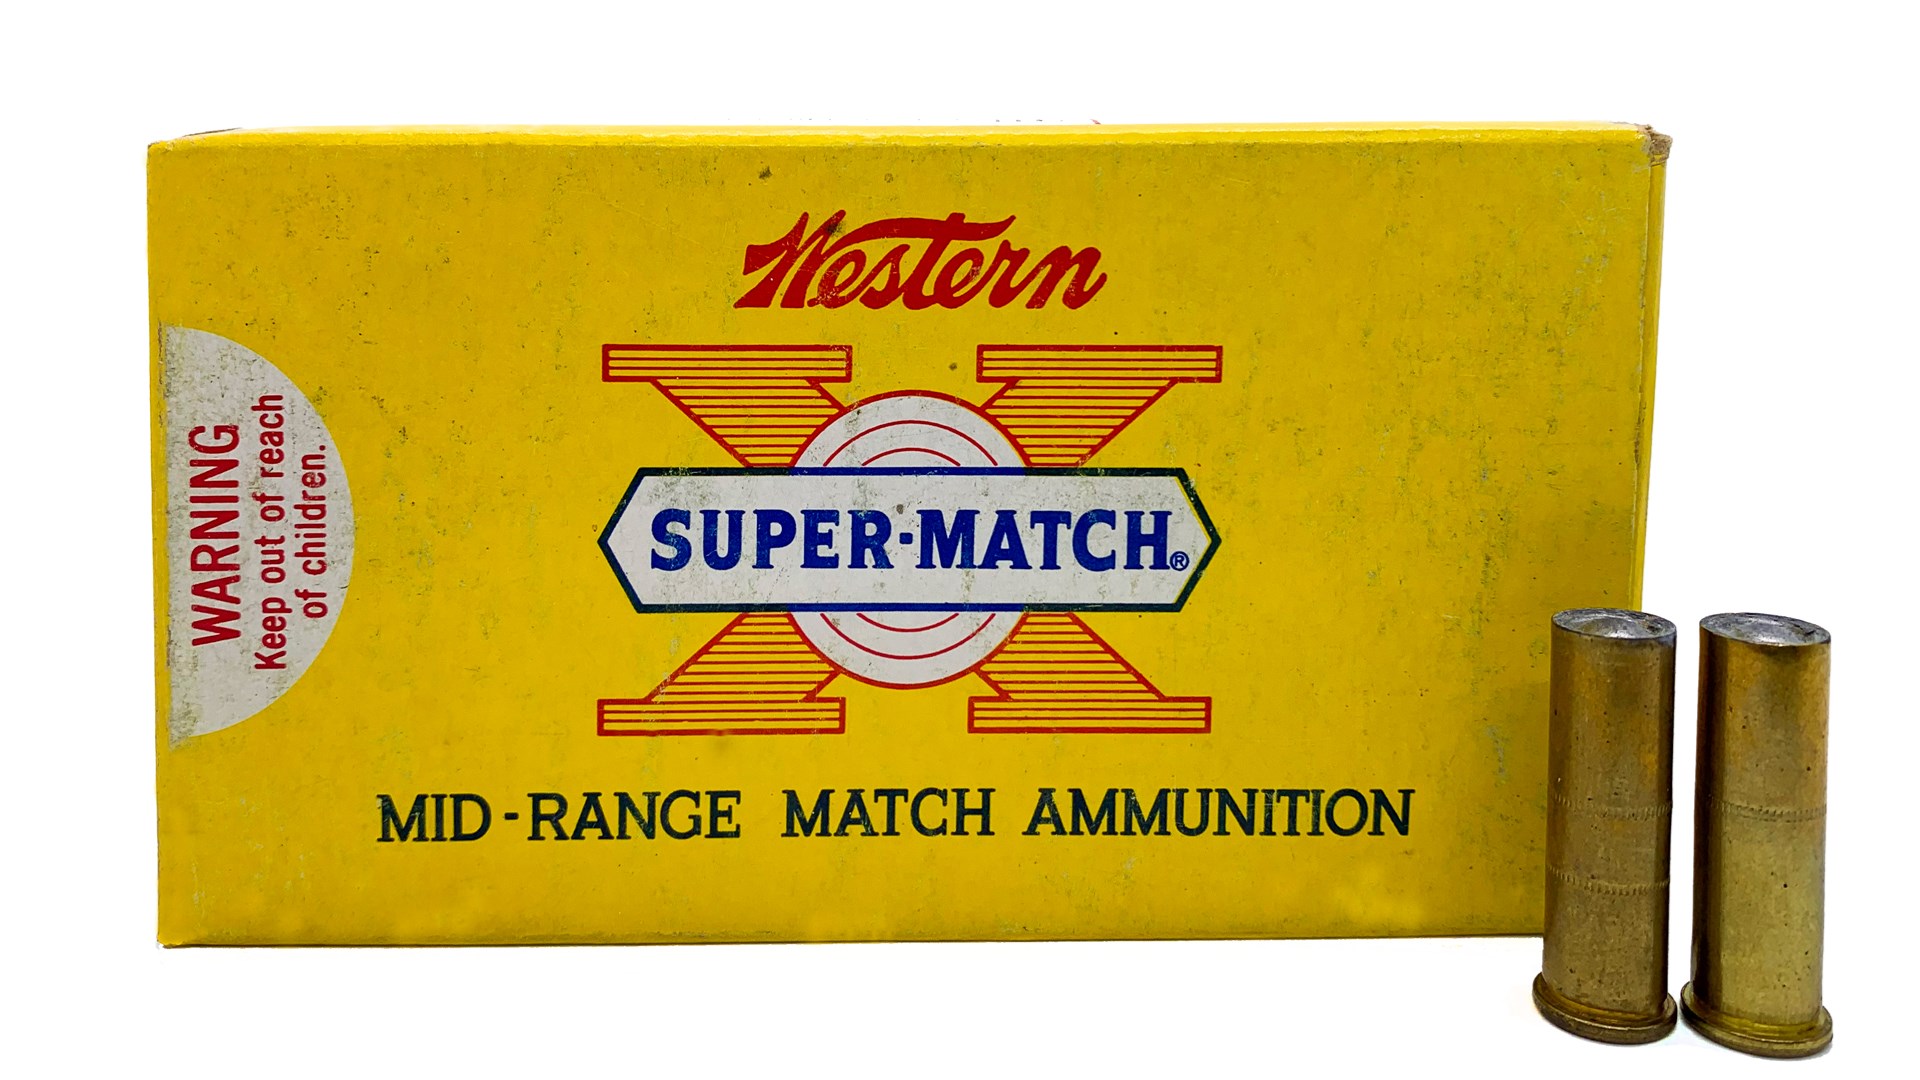 Western Super Match yellow ammunition box text on box mid-range match ammunition wadcutter bullet .38 Special History And Perfornance